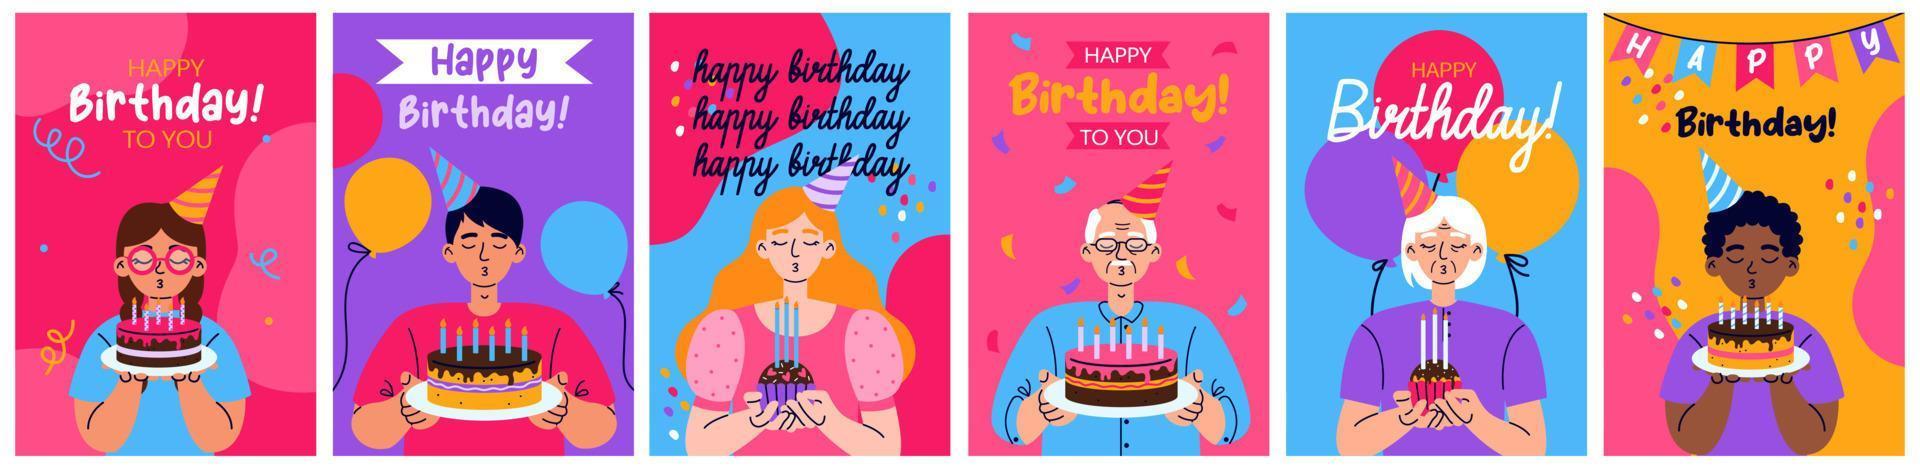 Set of Birthday greeting cards with people blow out candles on the cake or cupcake. Balloons and confetti on background. Birthday party, celebration, congratulations, invitation concept. vector